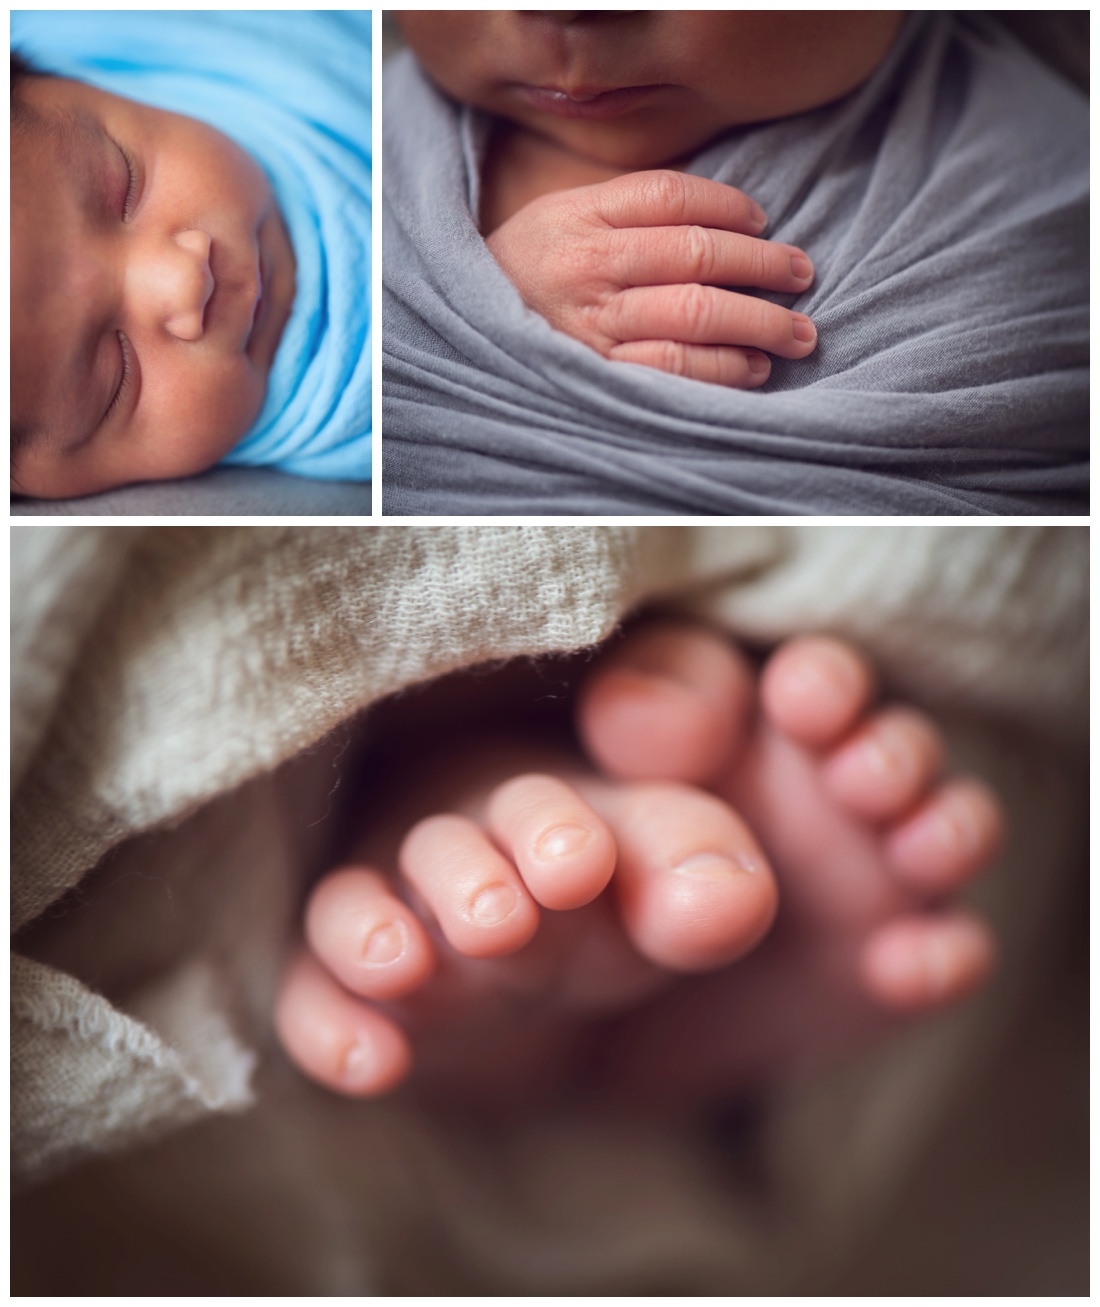 newborn baby boy detail shots eyelashes, fingers and toes